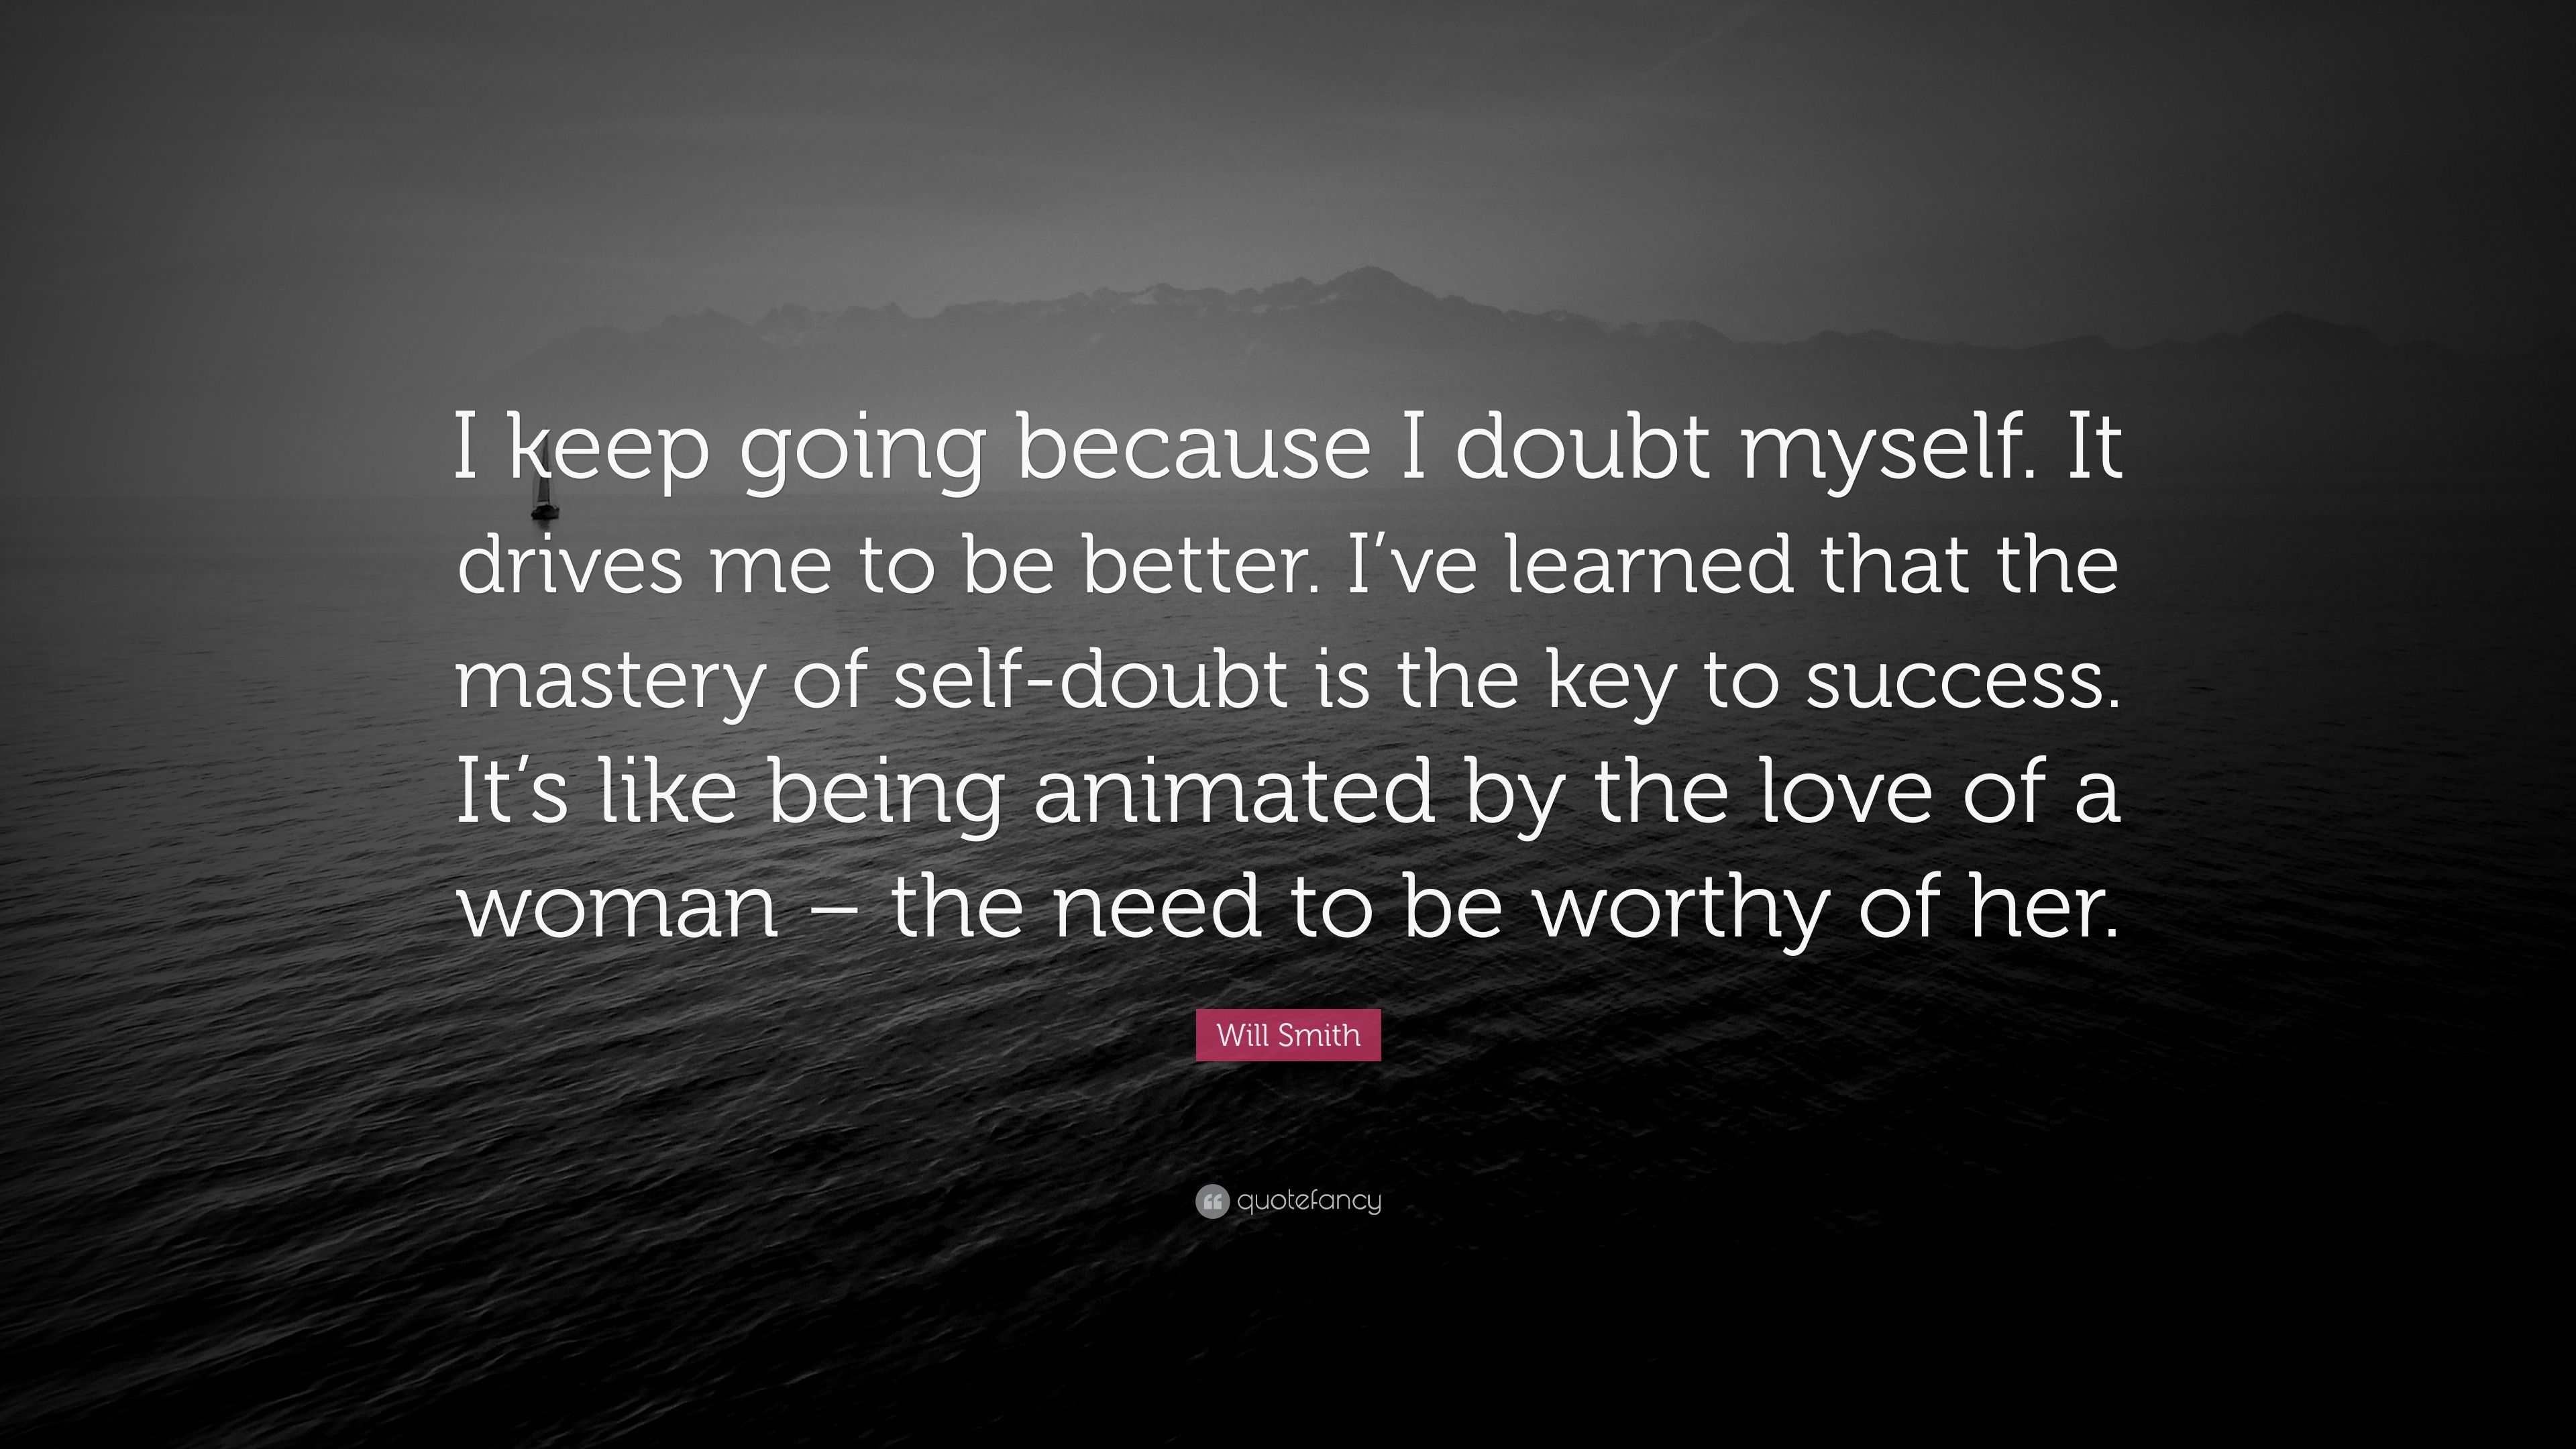 Will Smith Quote “I keep going because I doubt myself It drives me